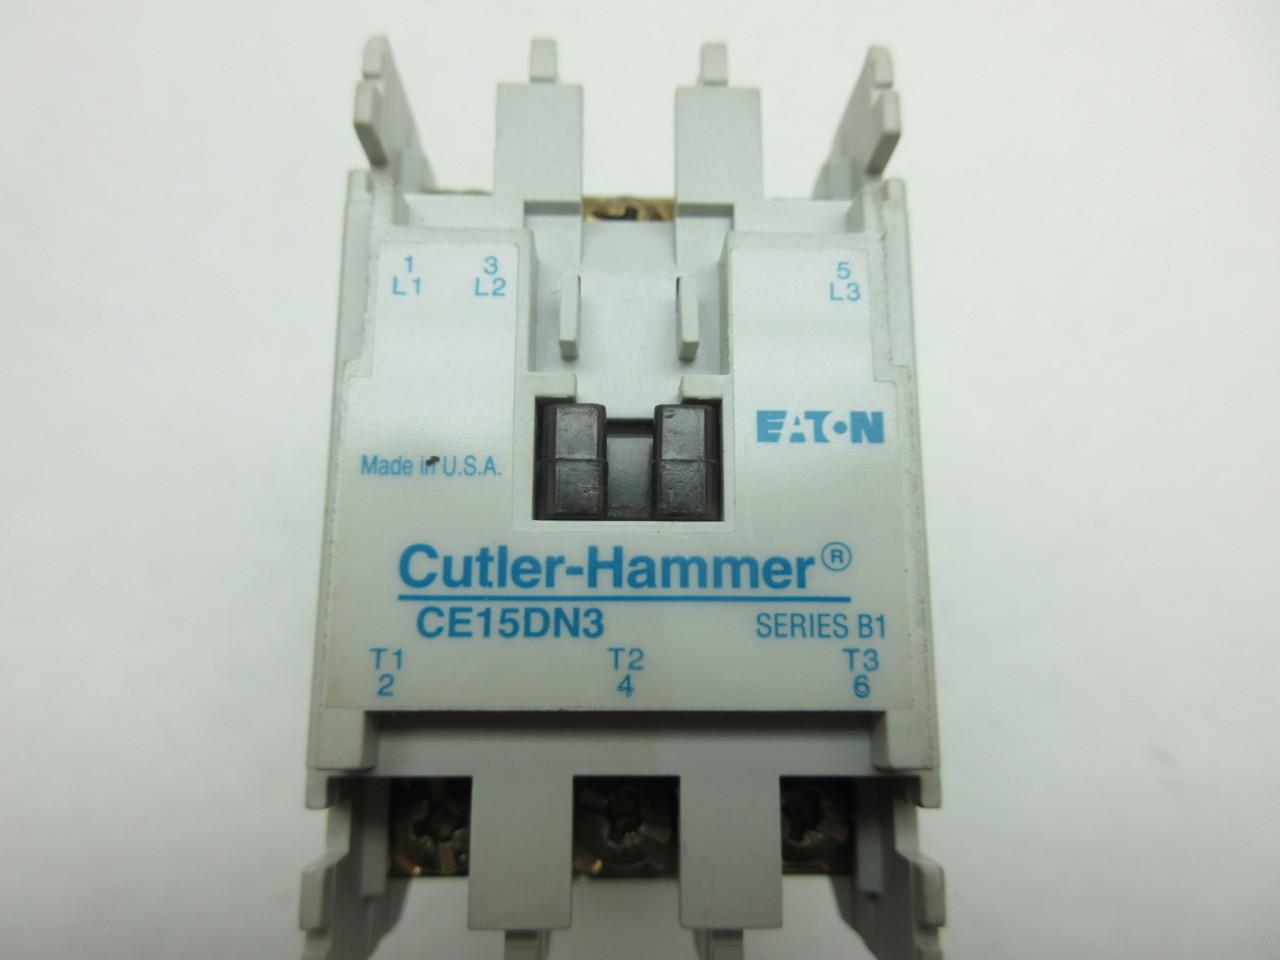 Cutler-Hammer CE15DN3 Contactor 120 Volt Coil 18 Amp Max 600 Volts for sale online 